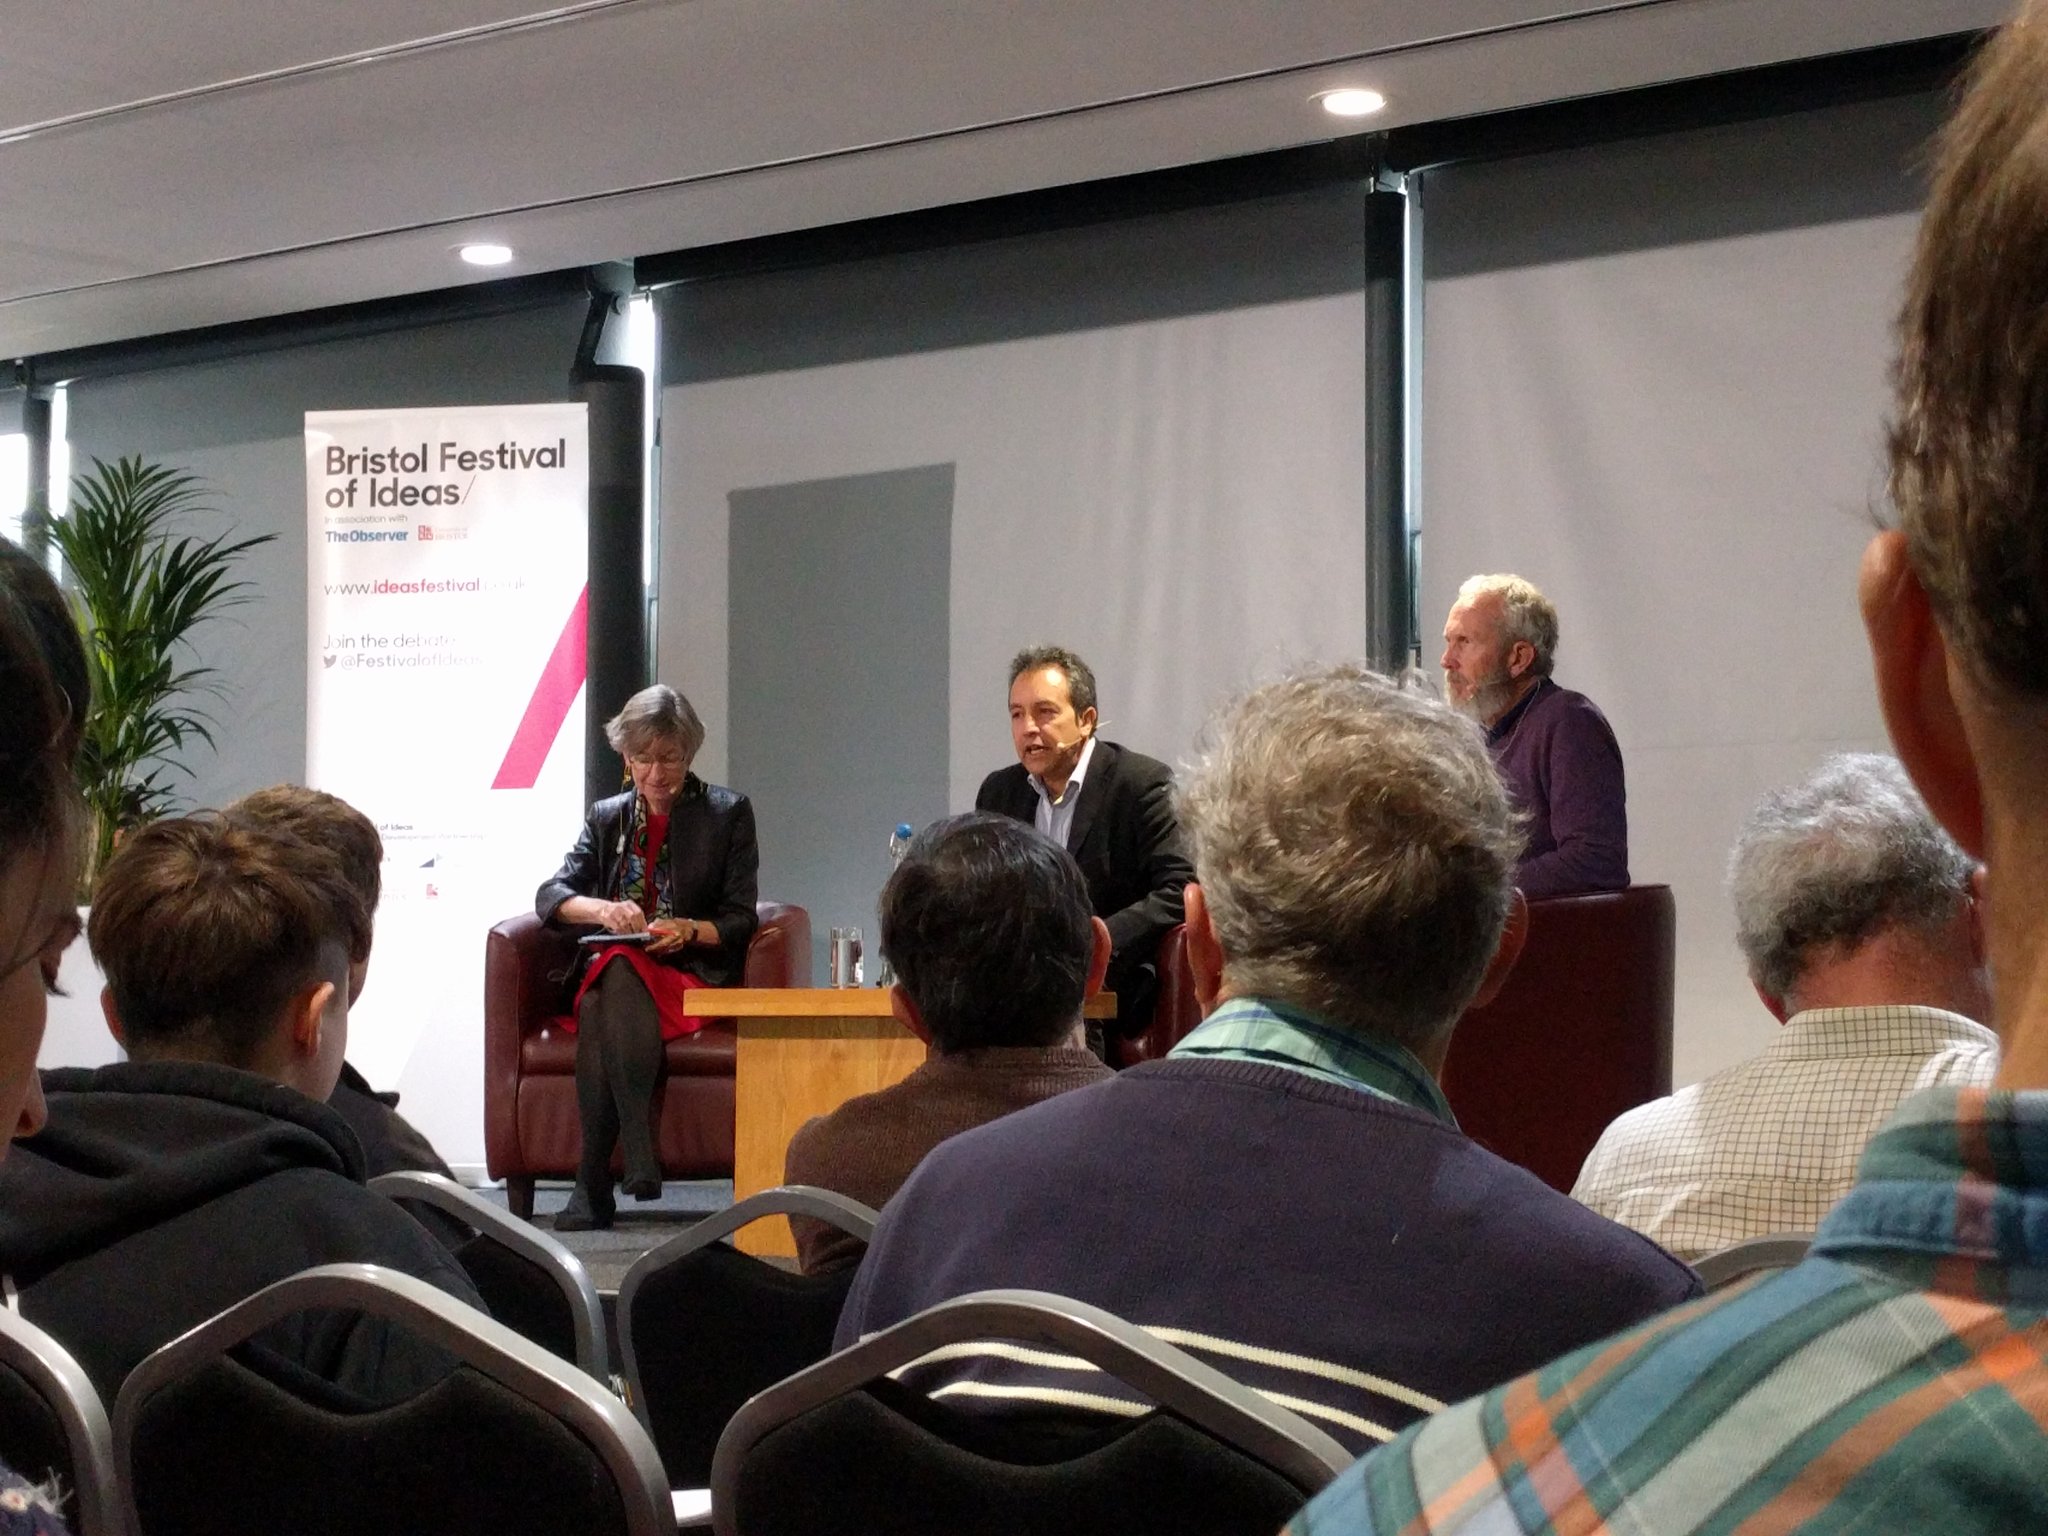 About to watch @CLMannEcon and Doyne Farmer debating at Bristol #economicsfest https://t.co/6bSc3LL0pU